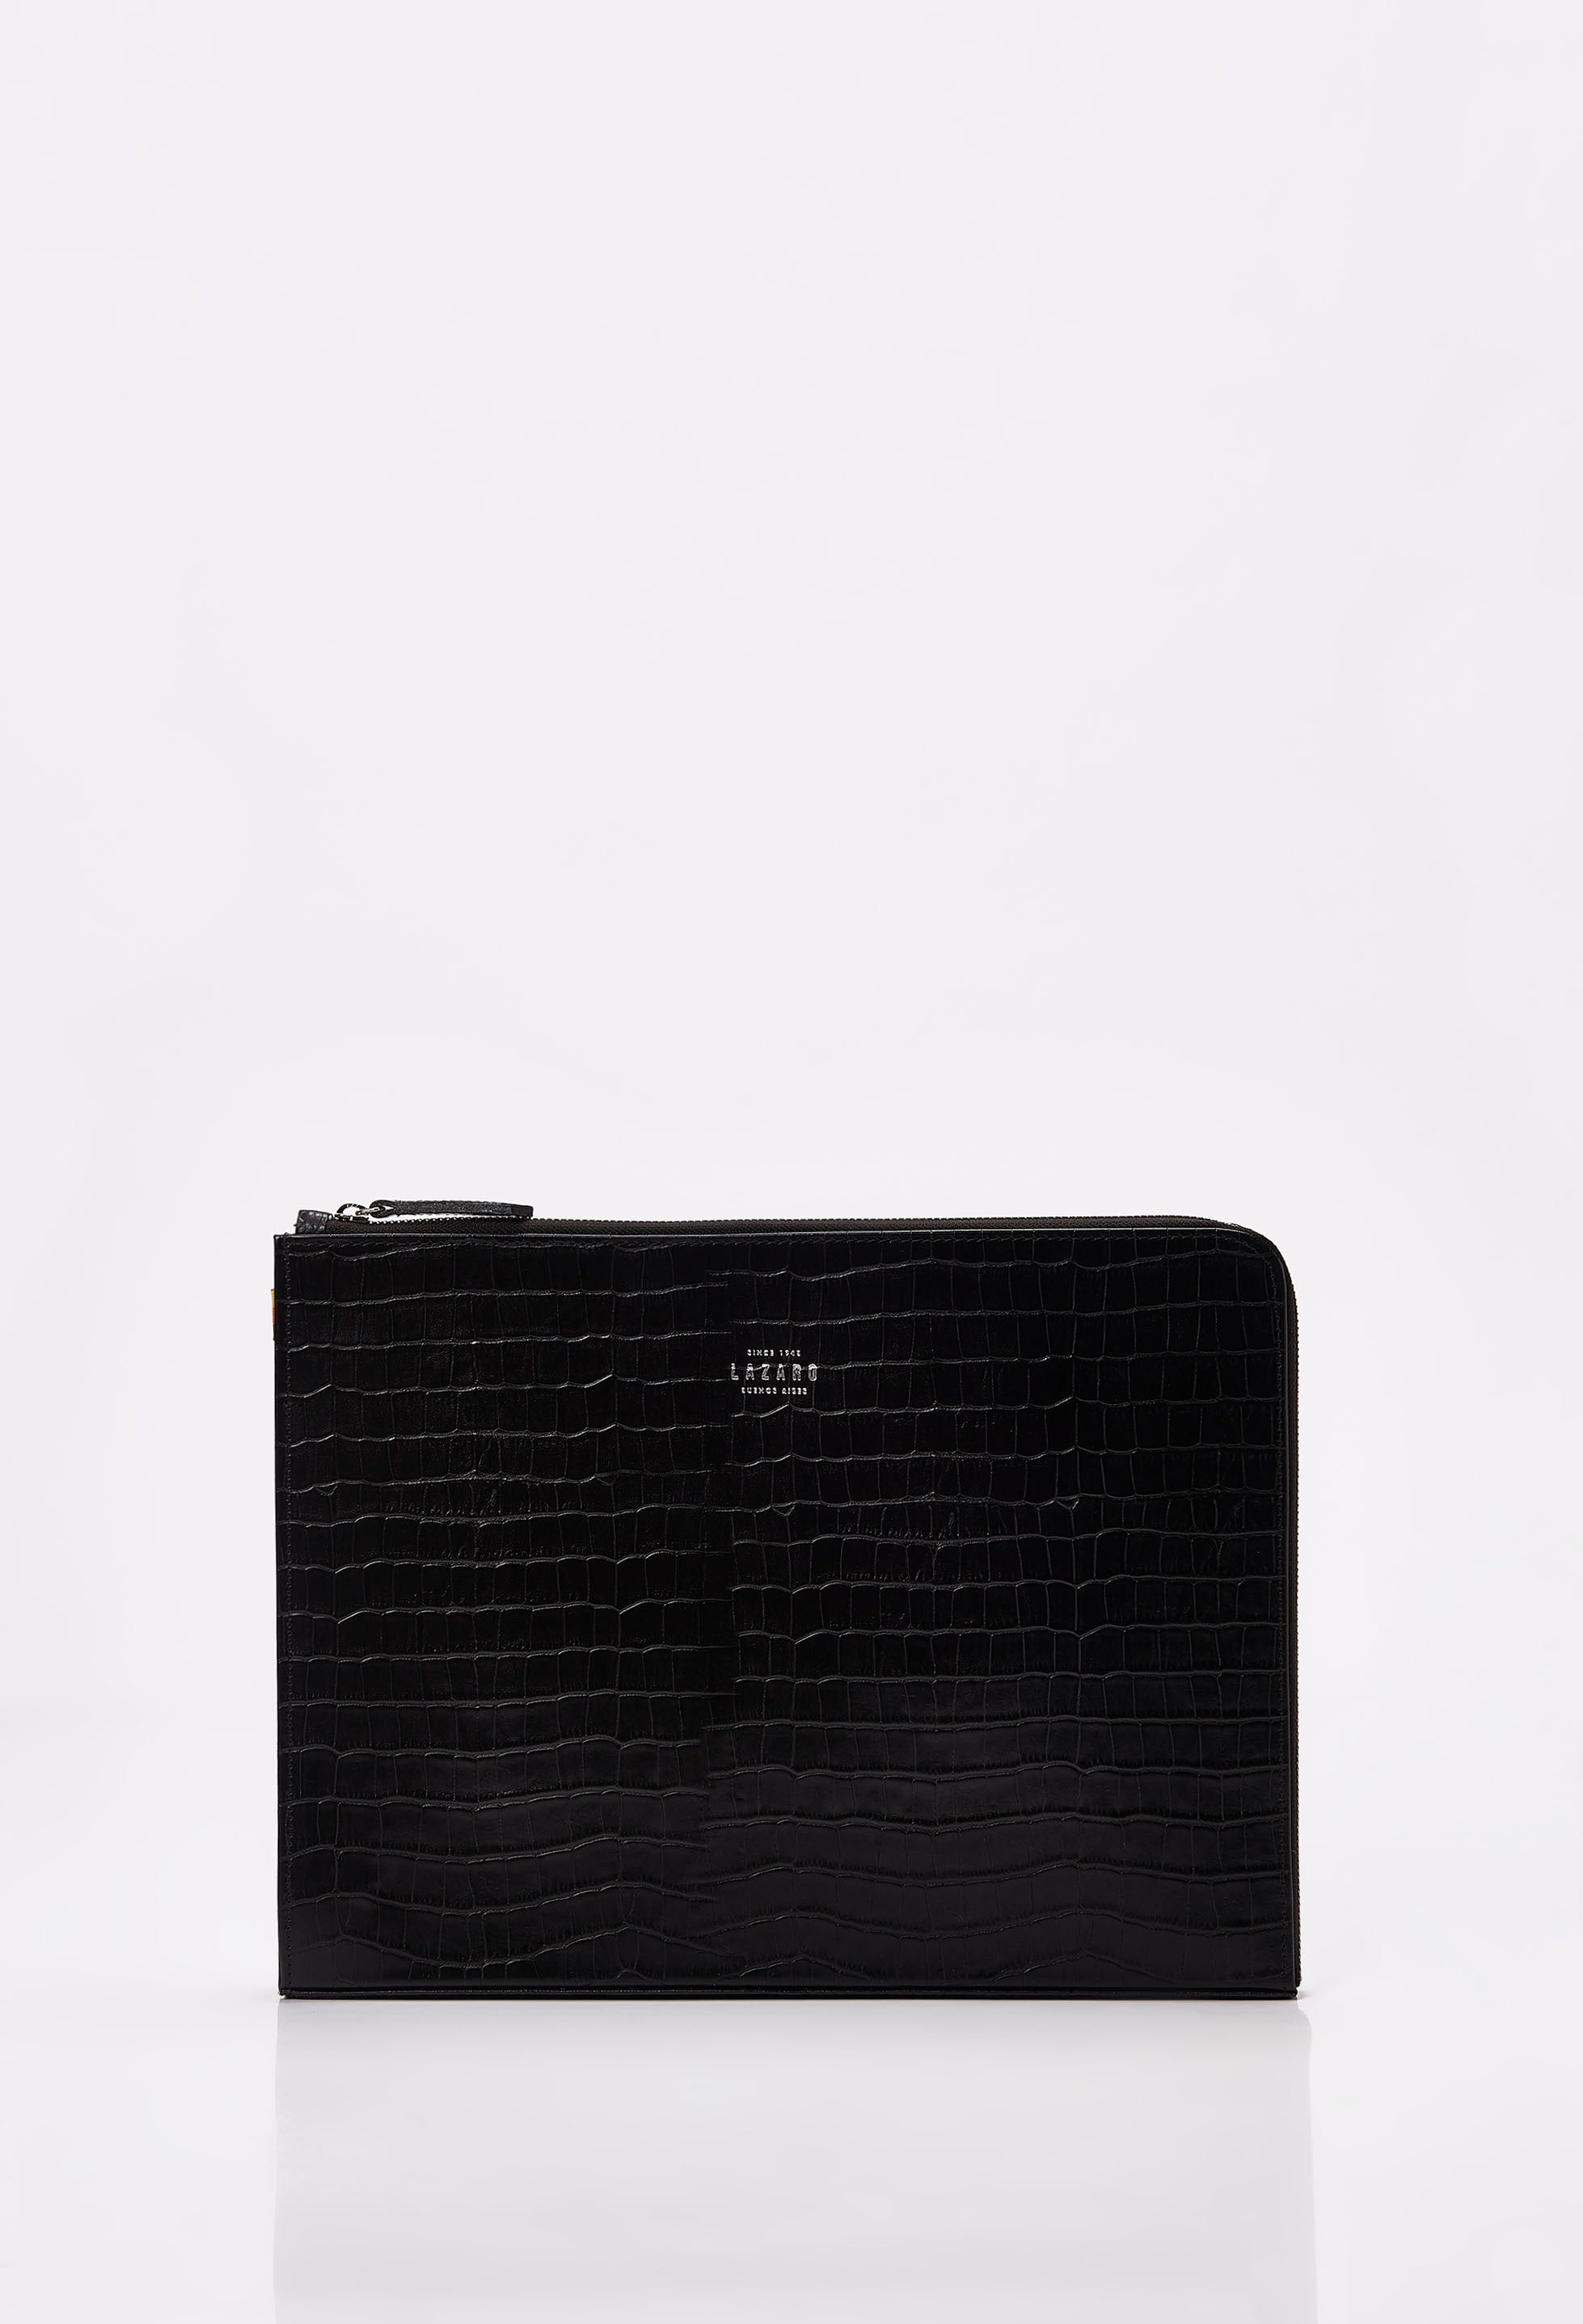 Front of a Black Croco Leather Slim Computer Case with Lazaro logo.